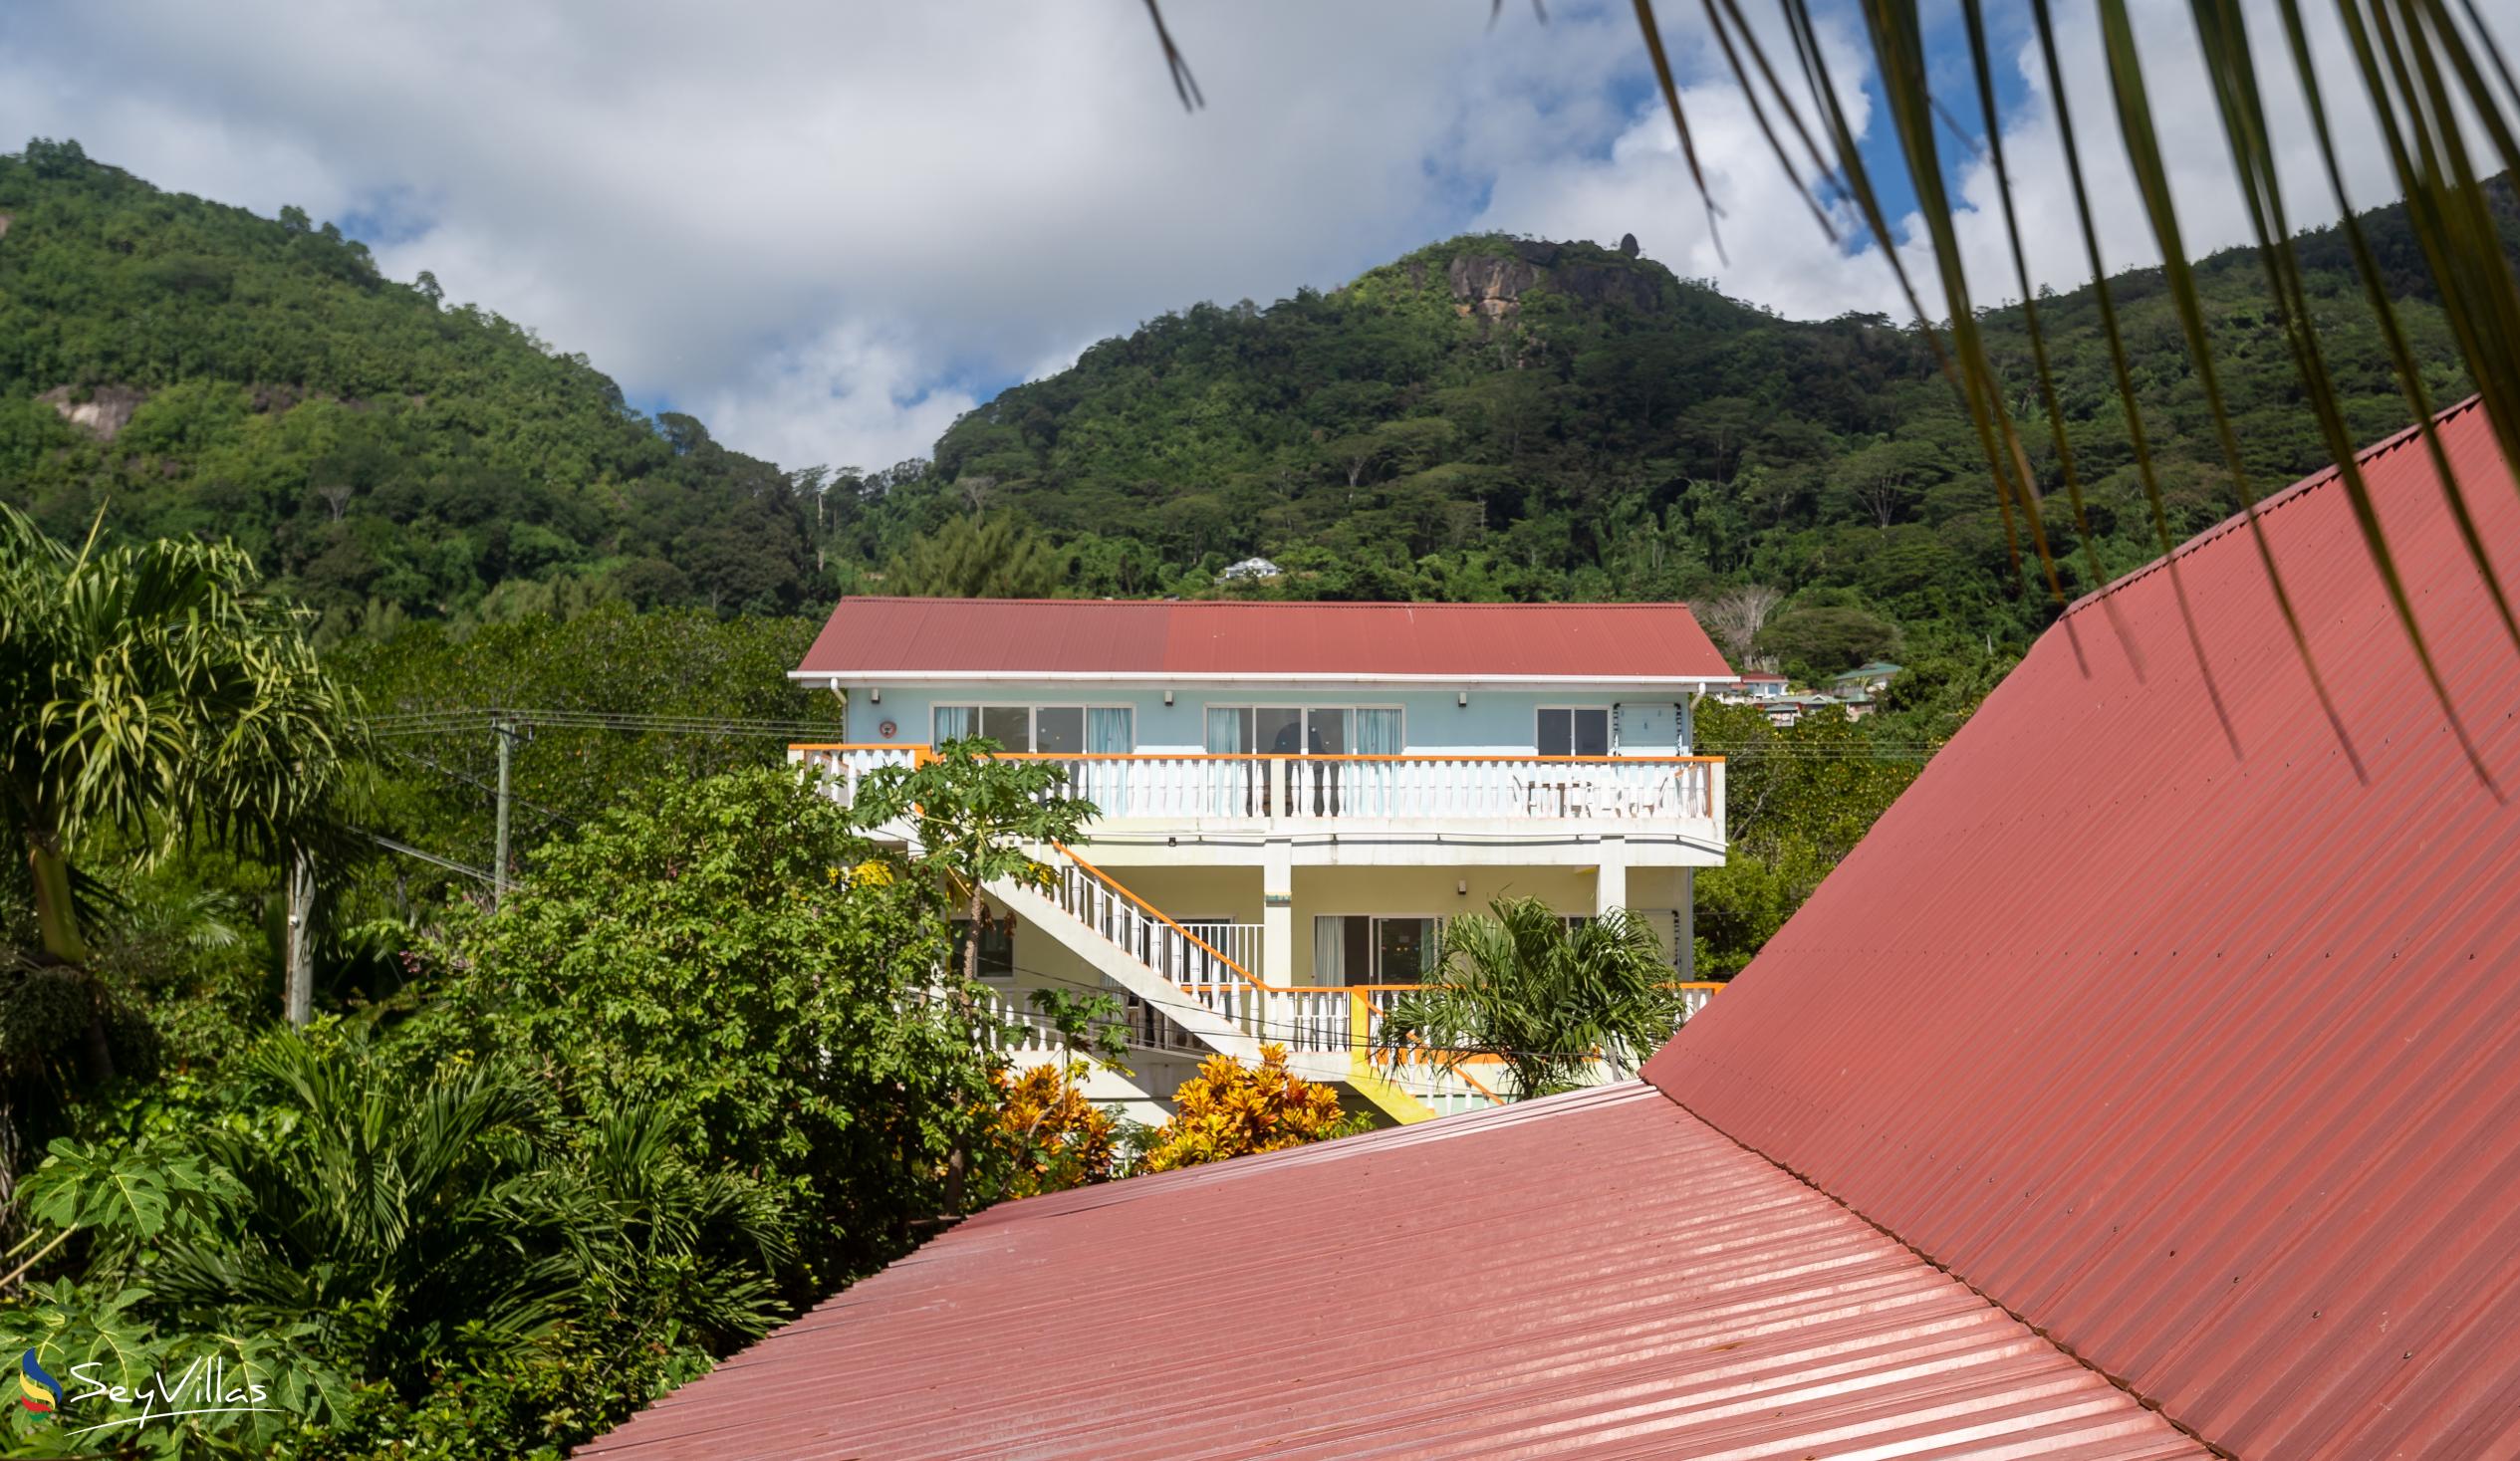 Photo 1: Chez Payet Self Catering - Outdoor area - Mahé (Seychelles)